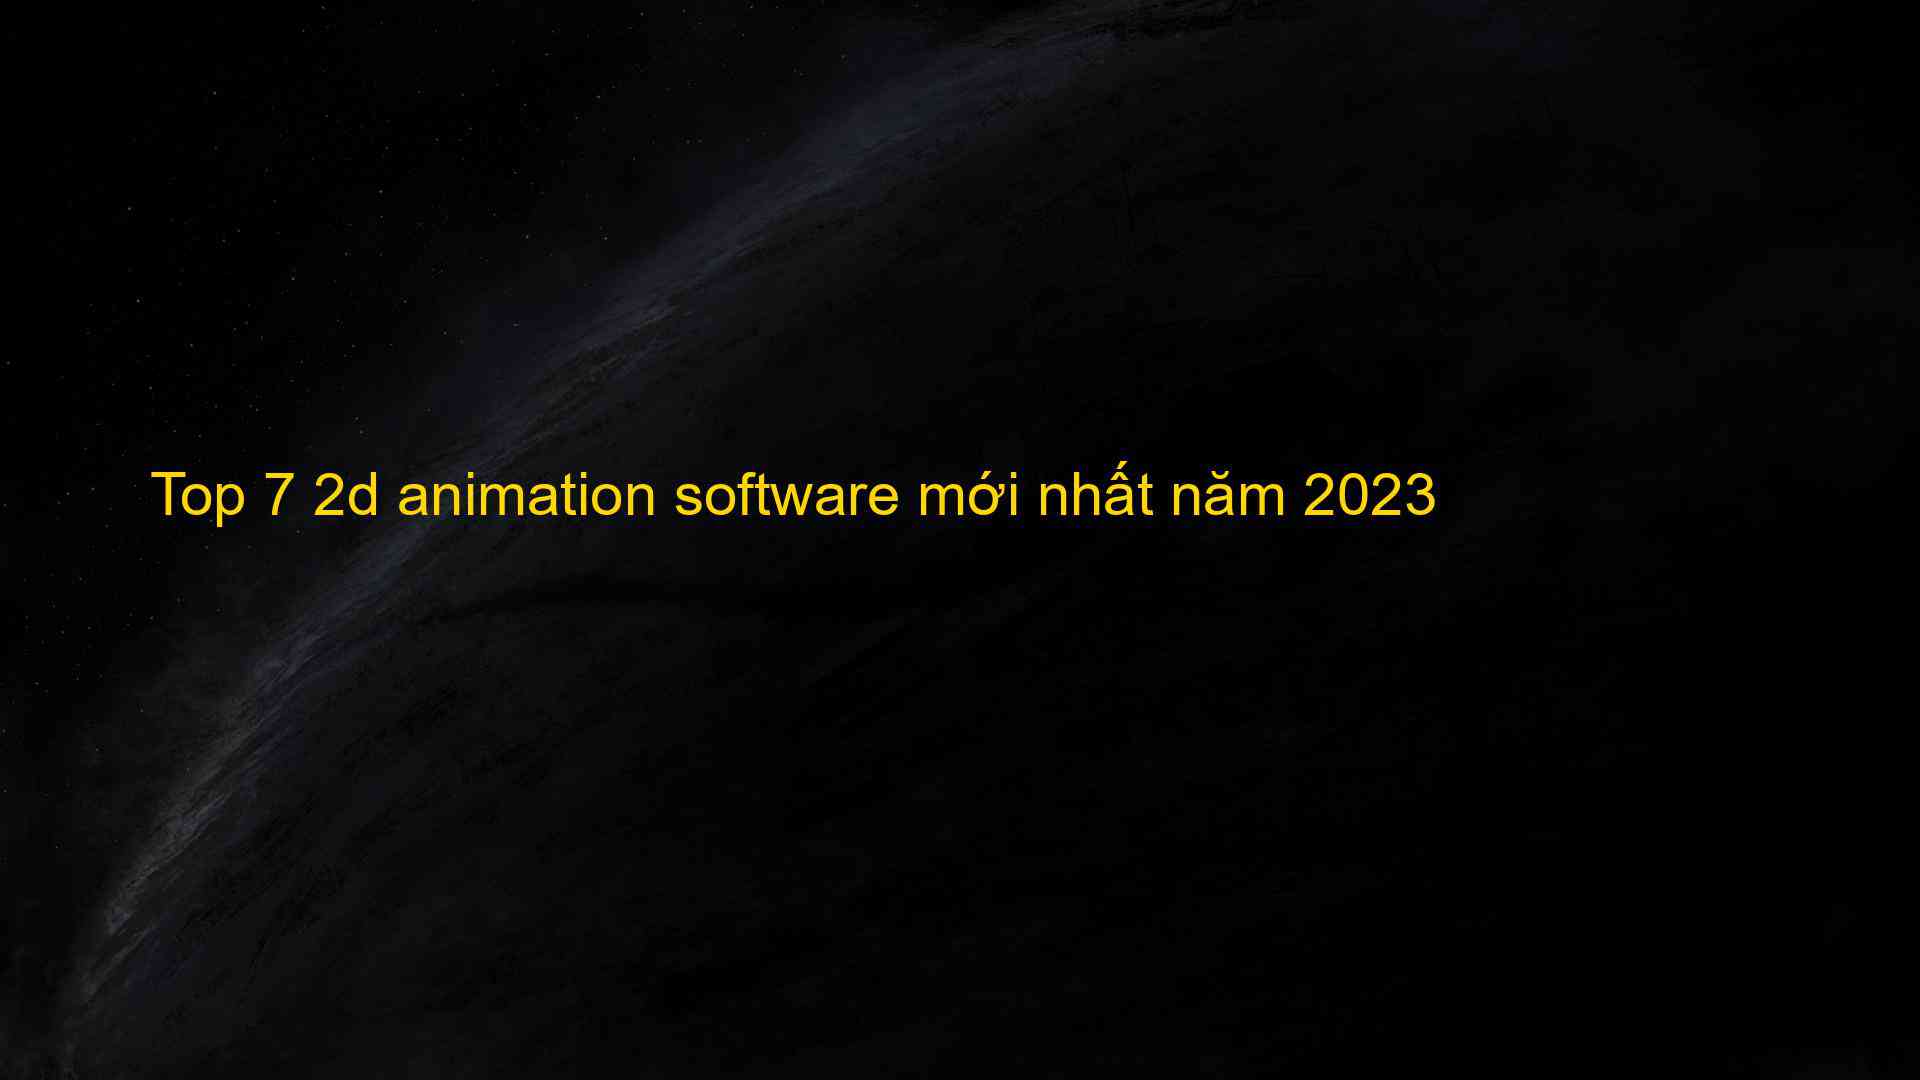 Top 7 2d Animation Software Mới Nhất Năm 2023 The First Knowledge Sharing Application In Vietnam 8666